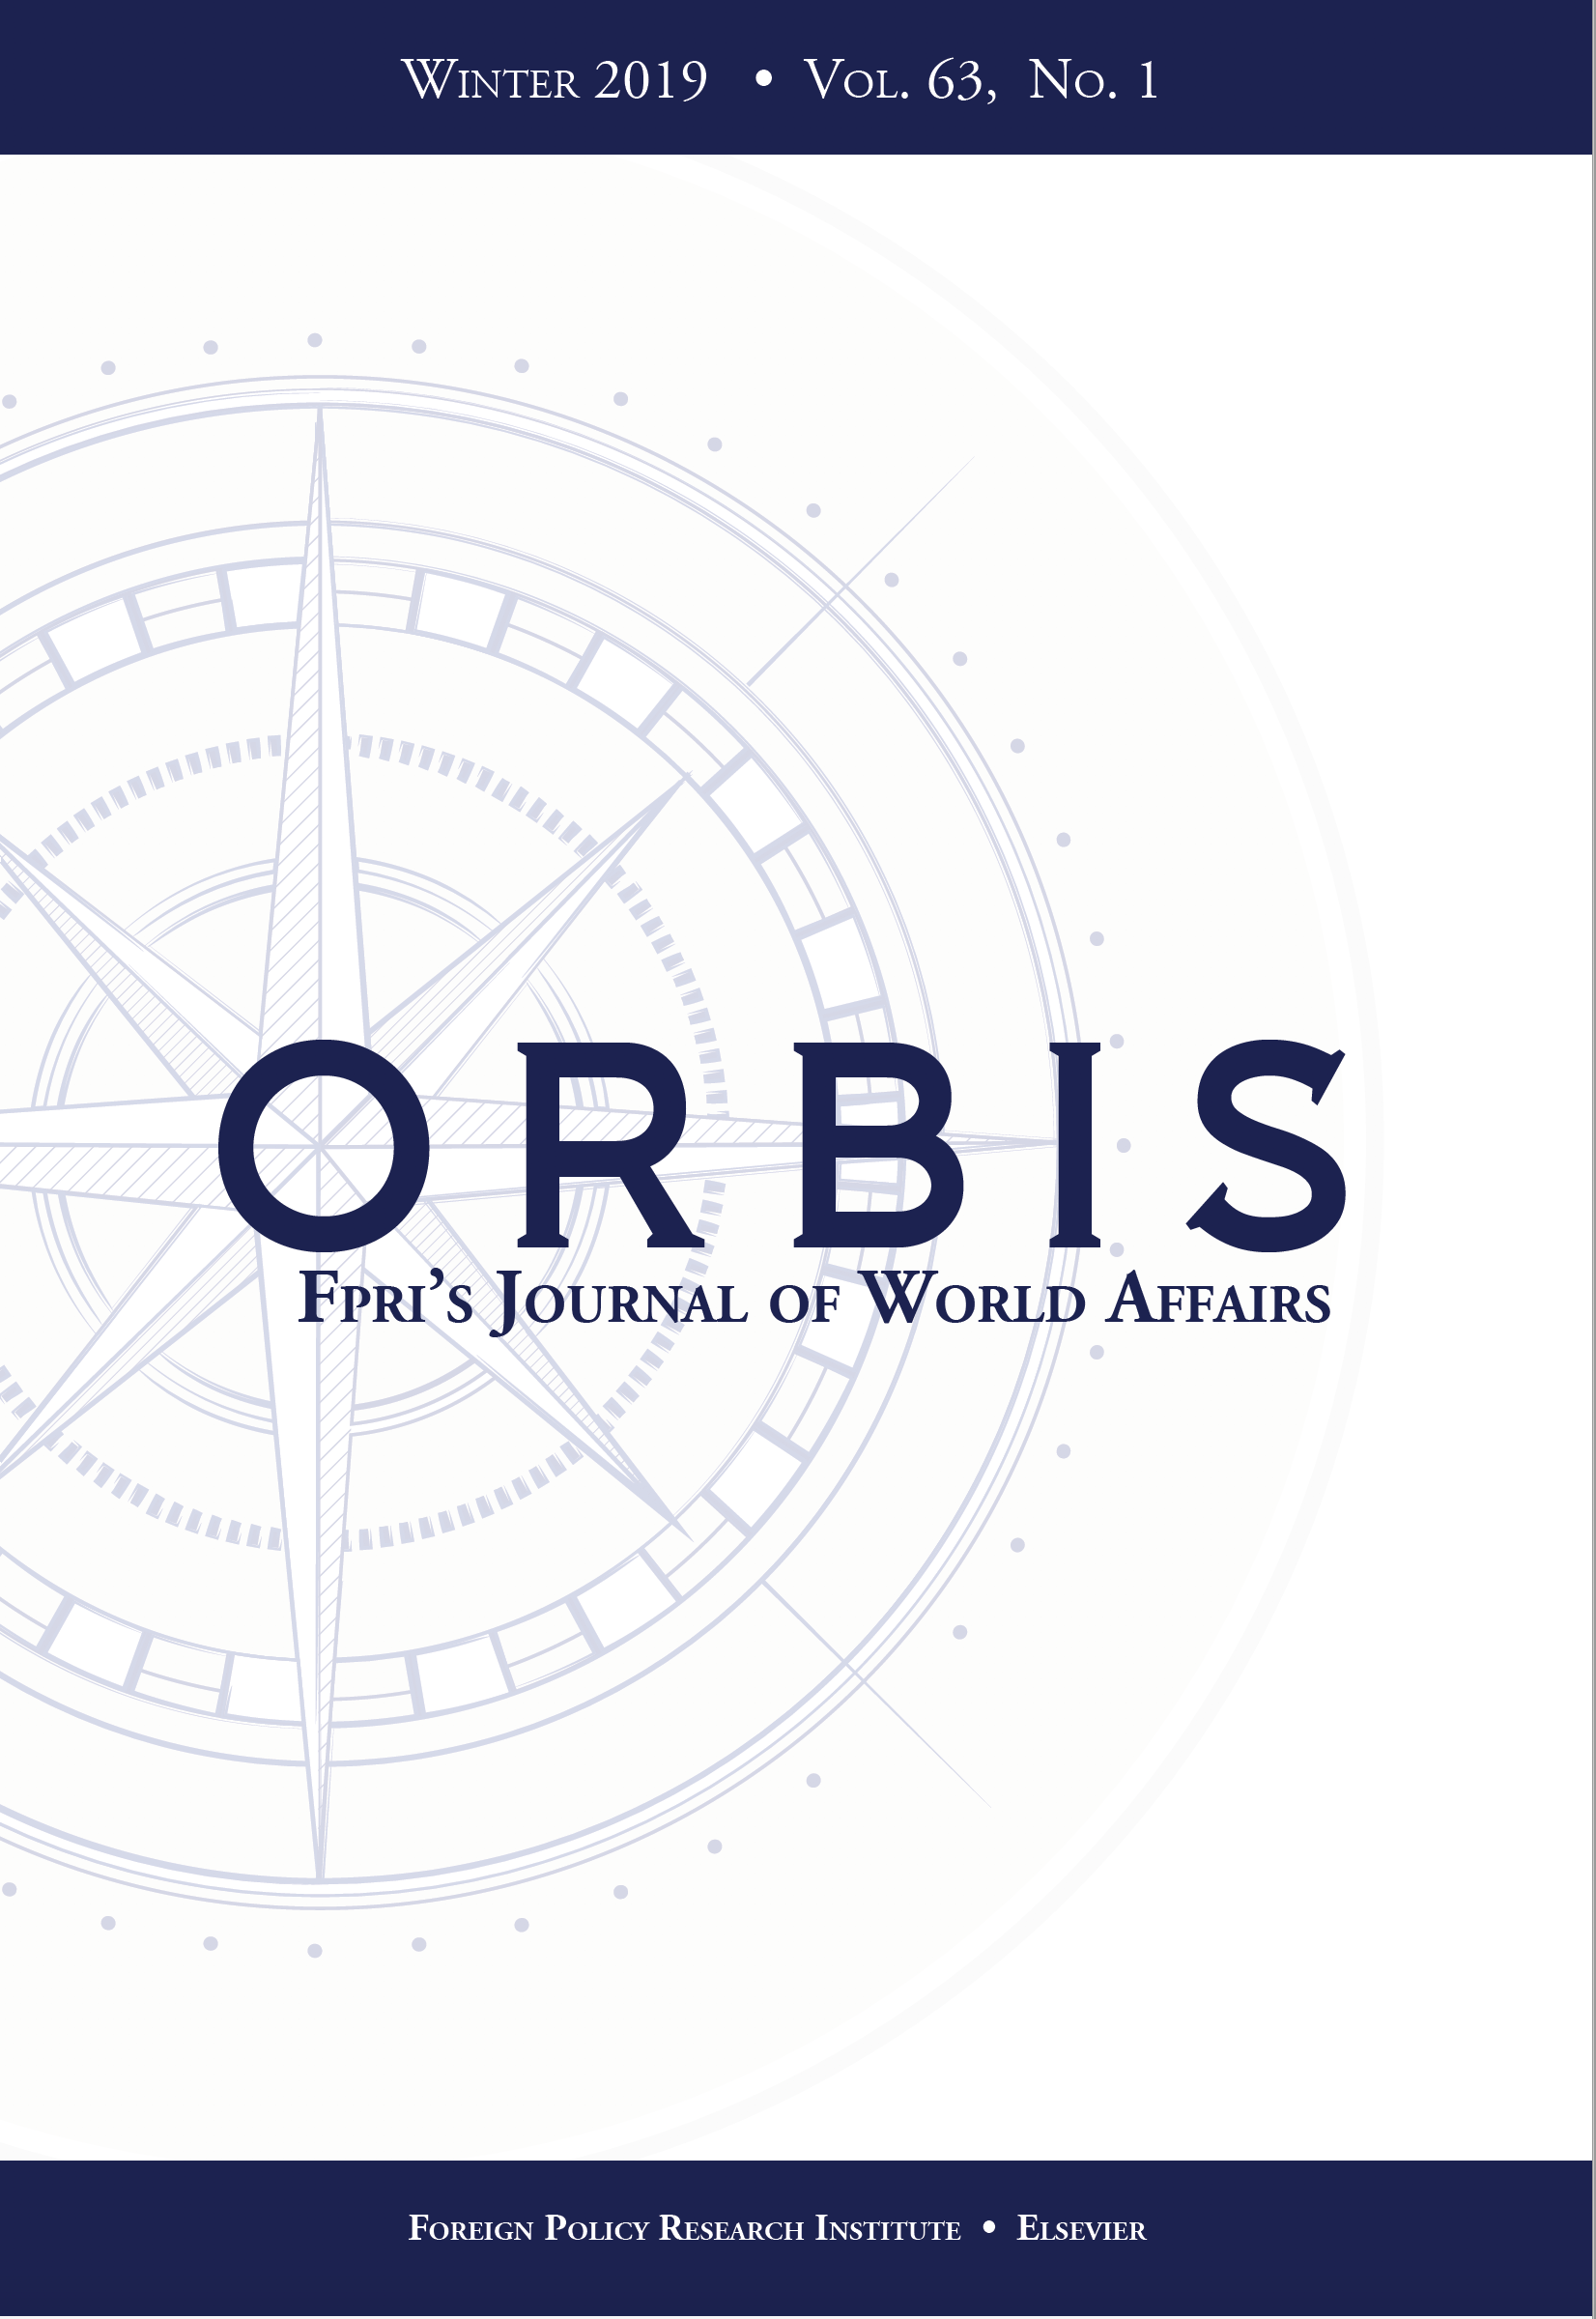 Announcing the Winter 2019 Issue of Orbis, FPRI’s Journal of World Affairs